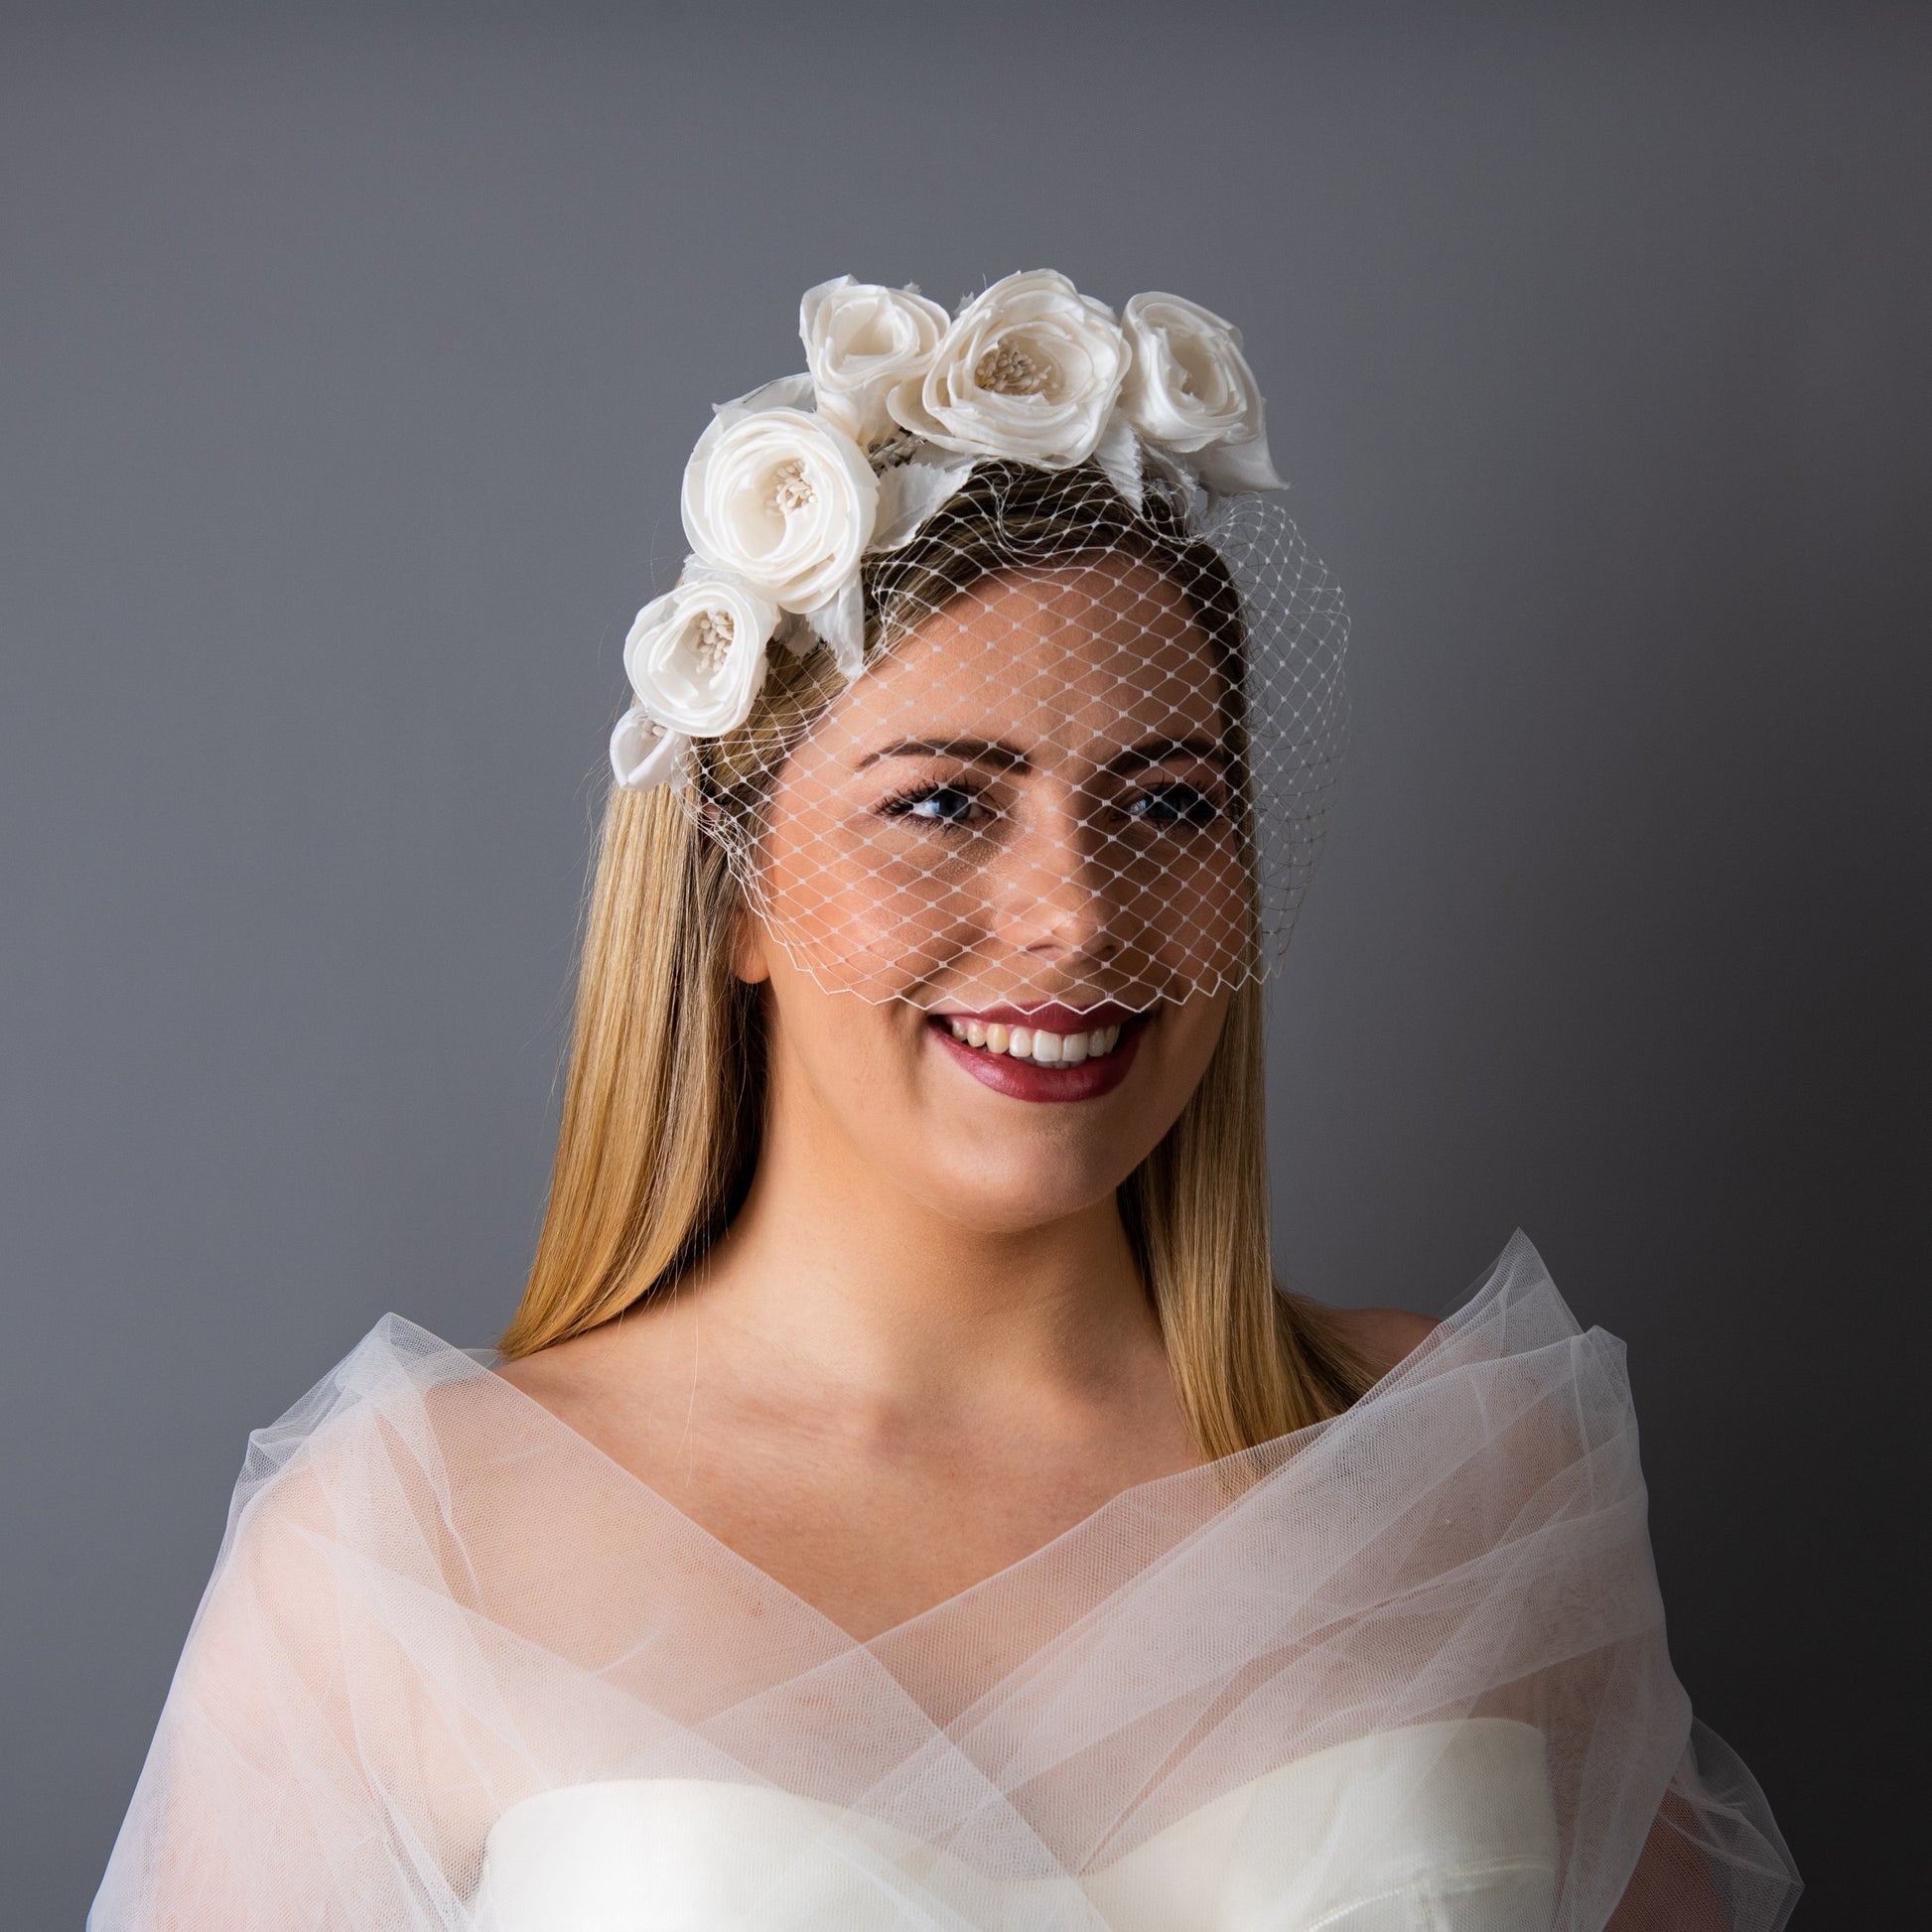 Happily Ever After Bridal birdcage veil with silk flowers on headband –  Lauren J Ritchie